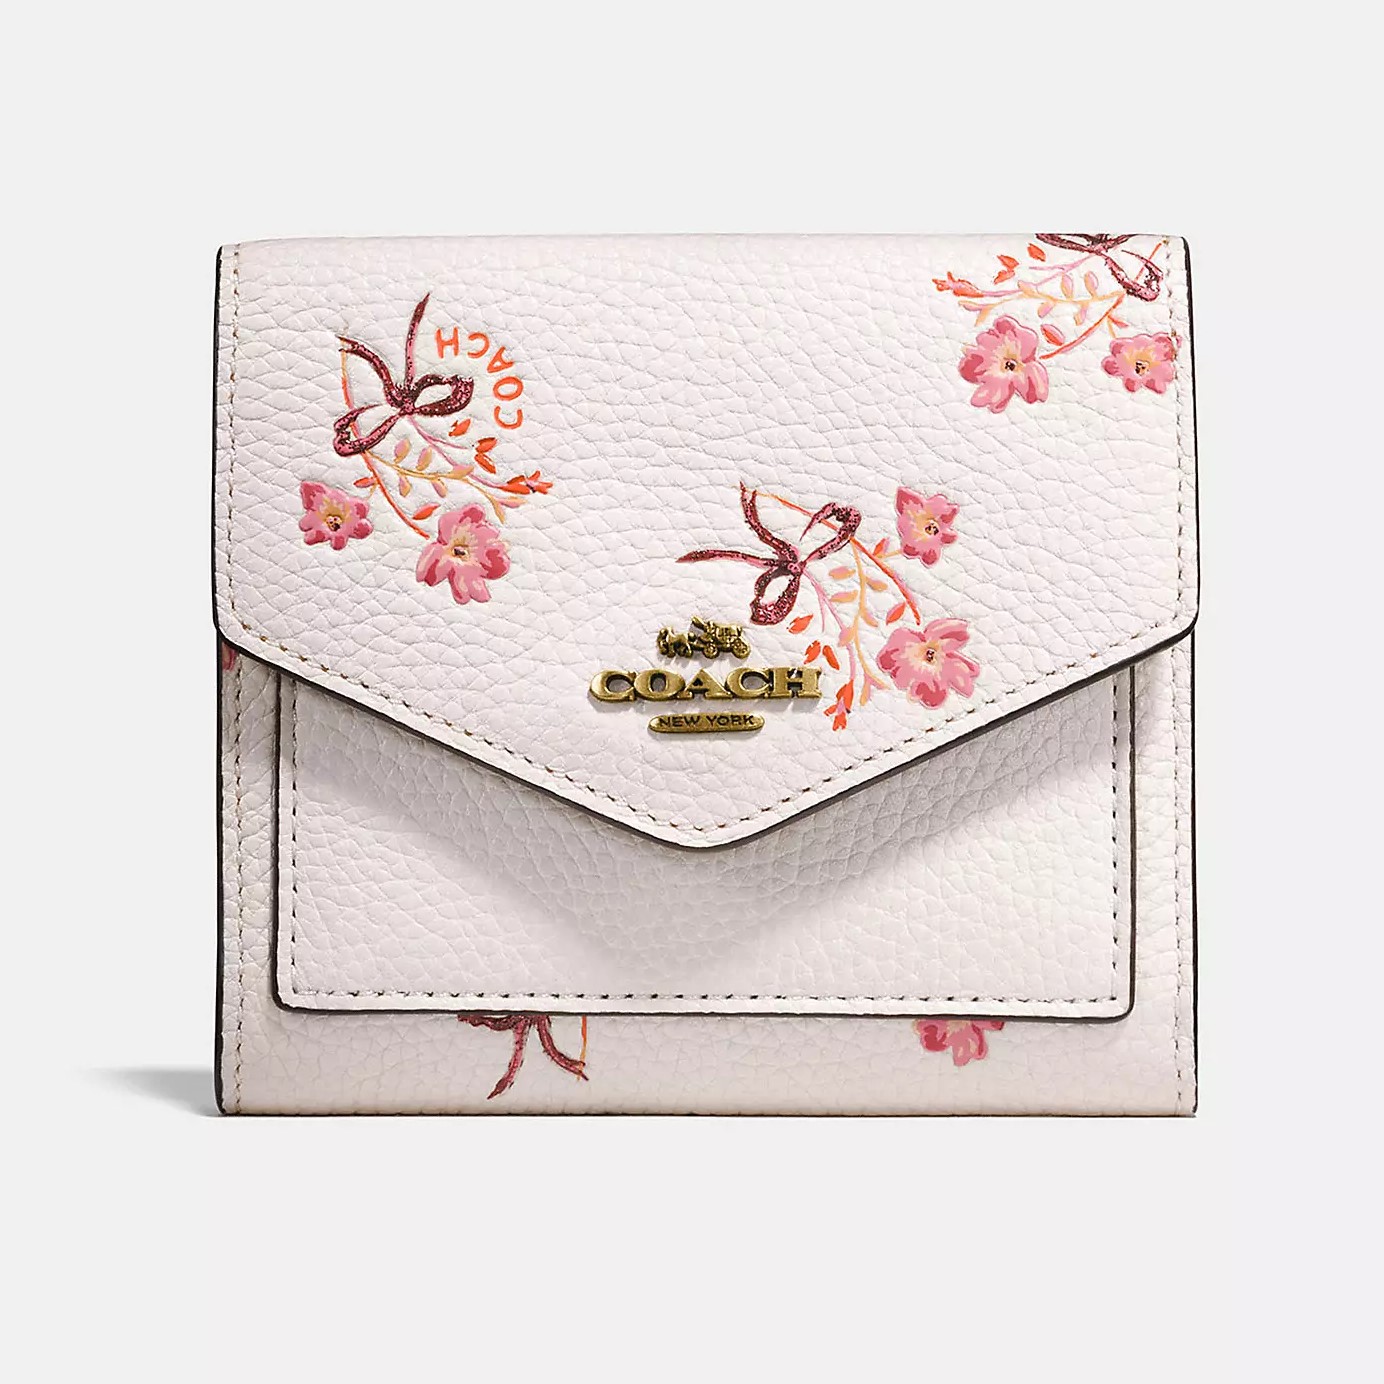 VÍ COACH NỮ SMALL WALLET WITH FLORAL BOW PRINT POLISHED PEBBLE LEATHER 28445 1